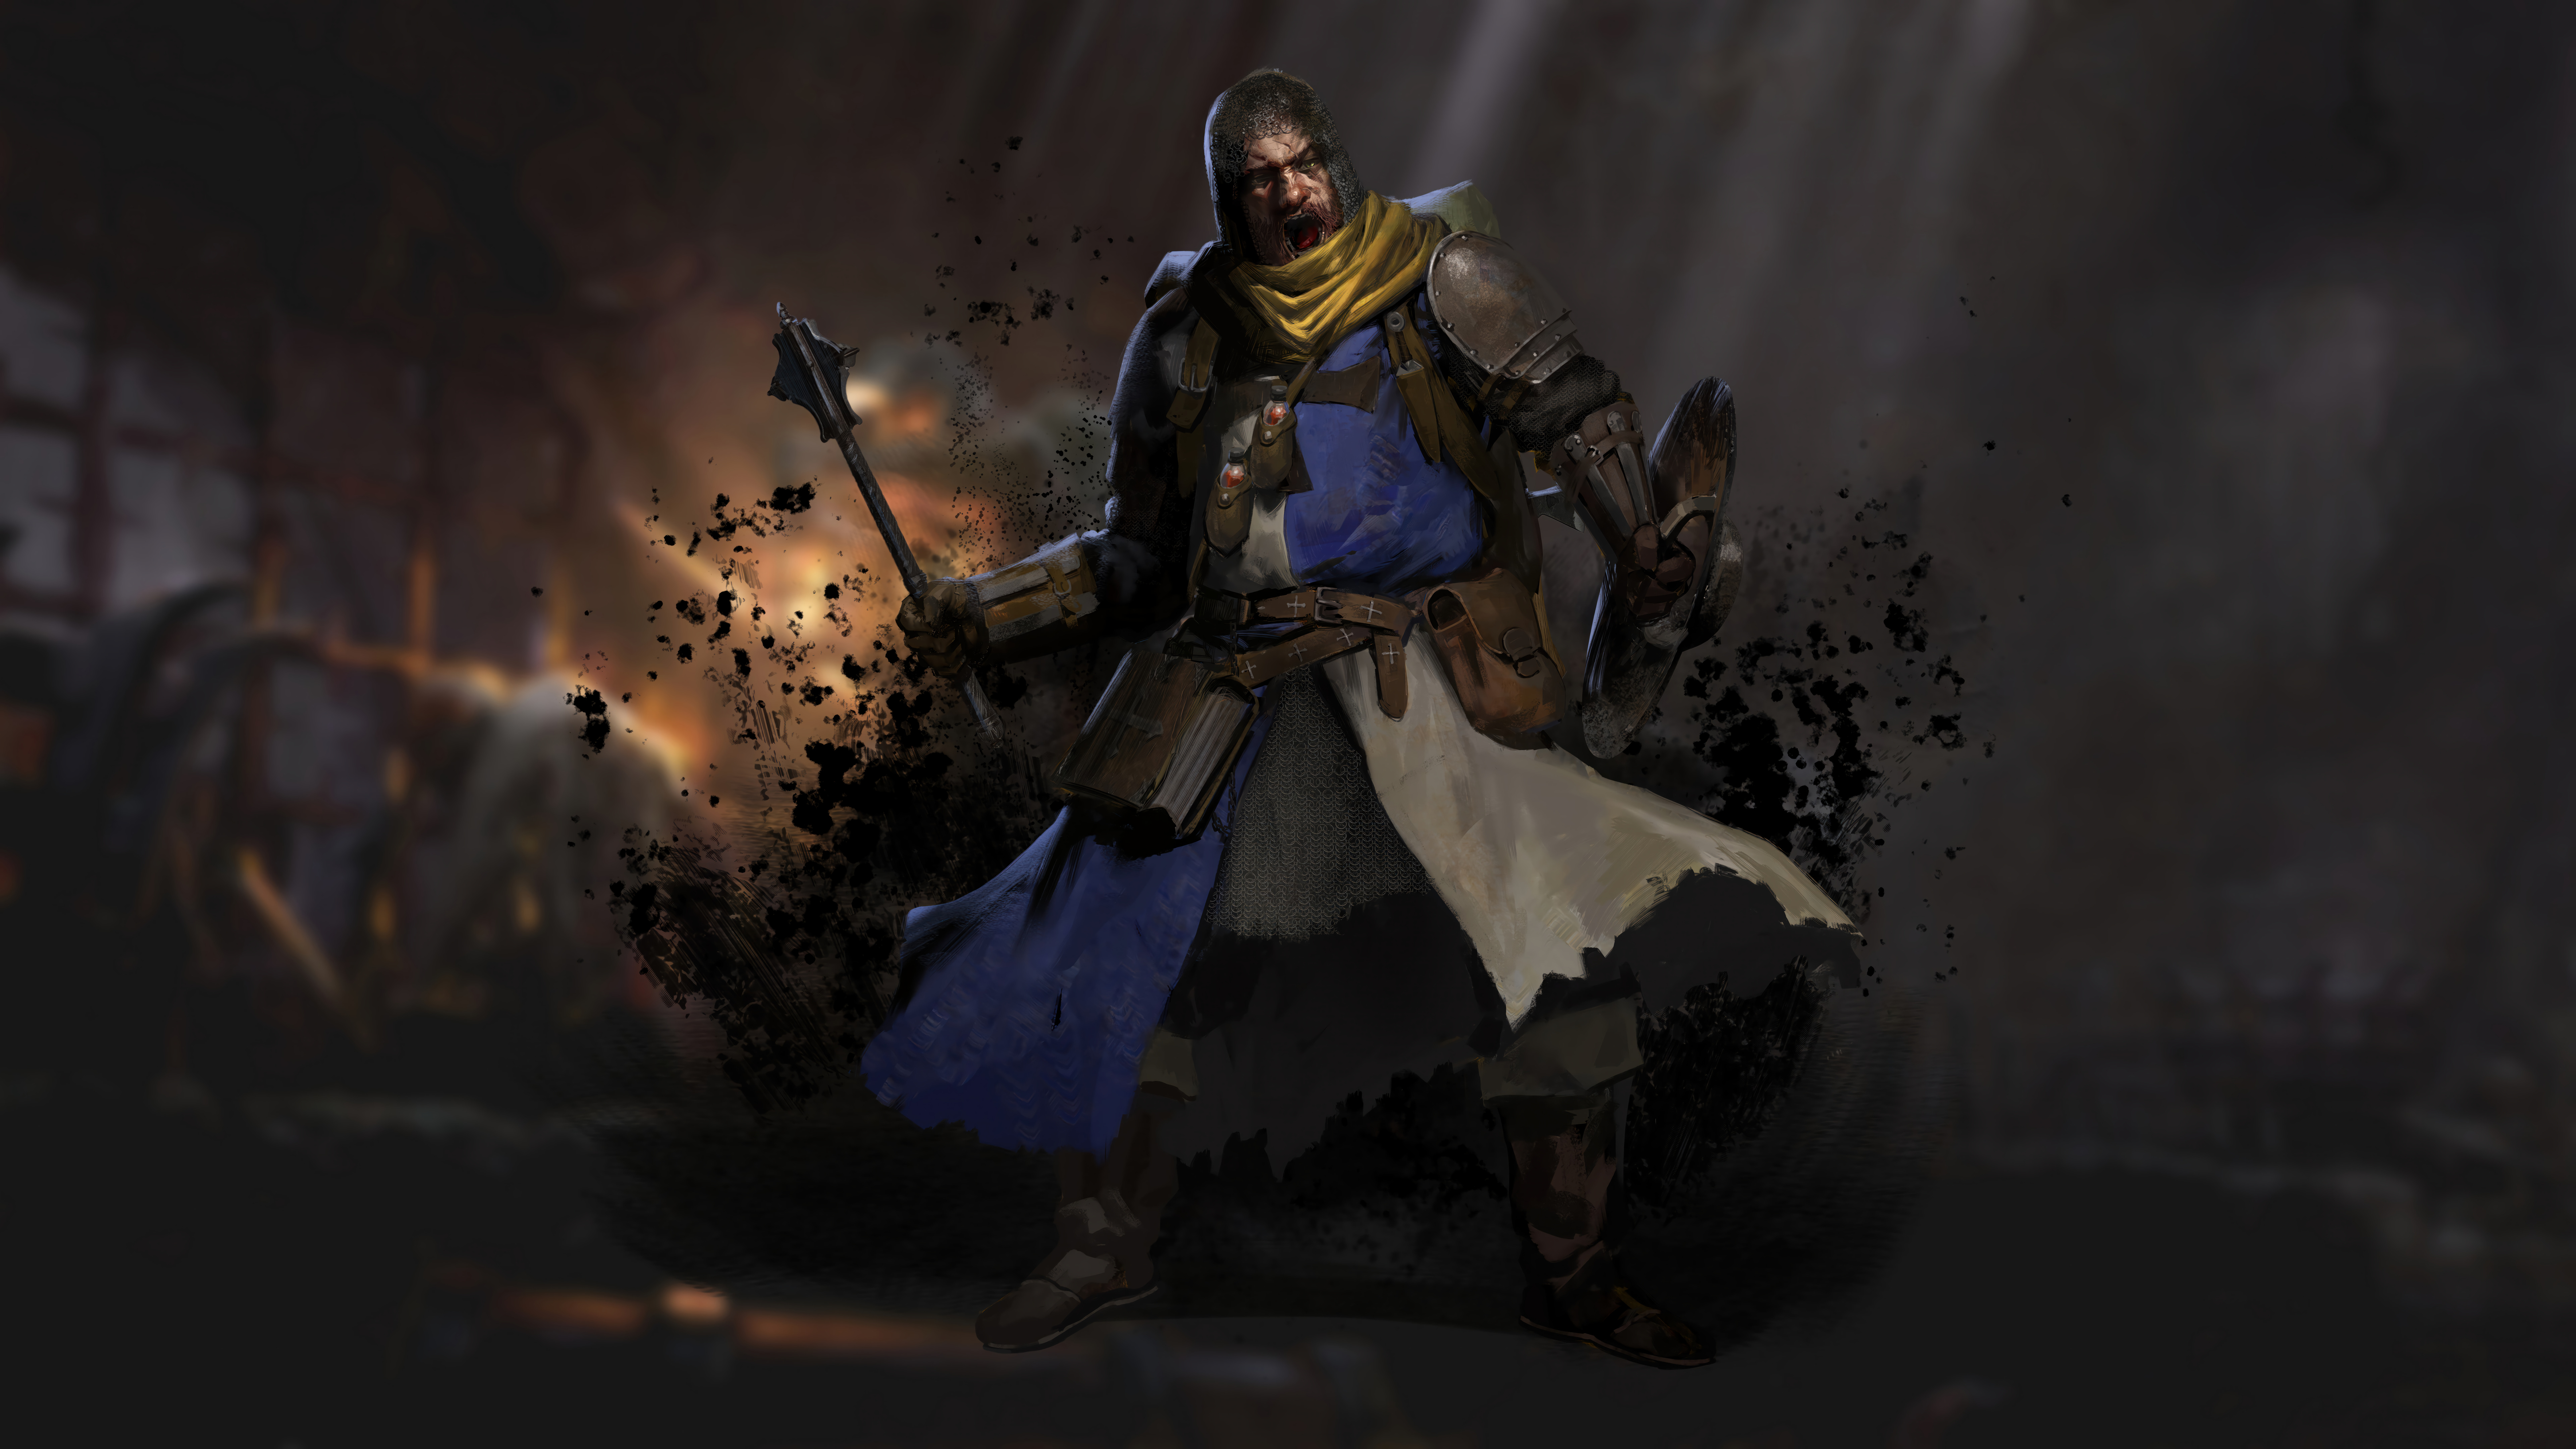 HD desktop wallpaper featuring a mysterious warrior from Dark and Darker game with an atmospheric, dark background suitable for a desktop background.